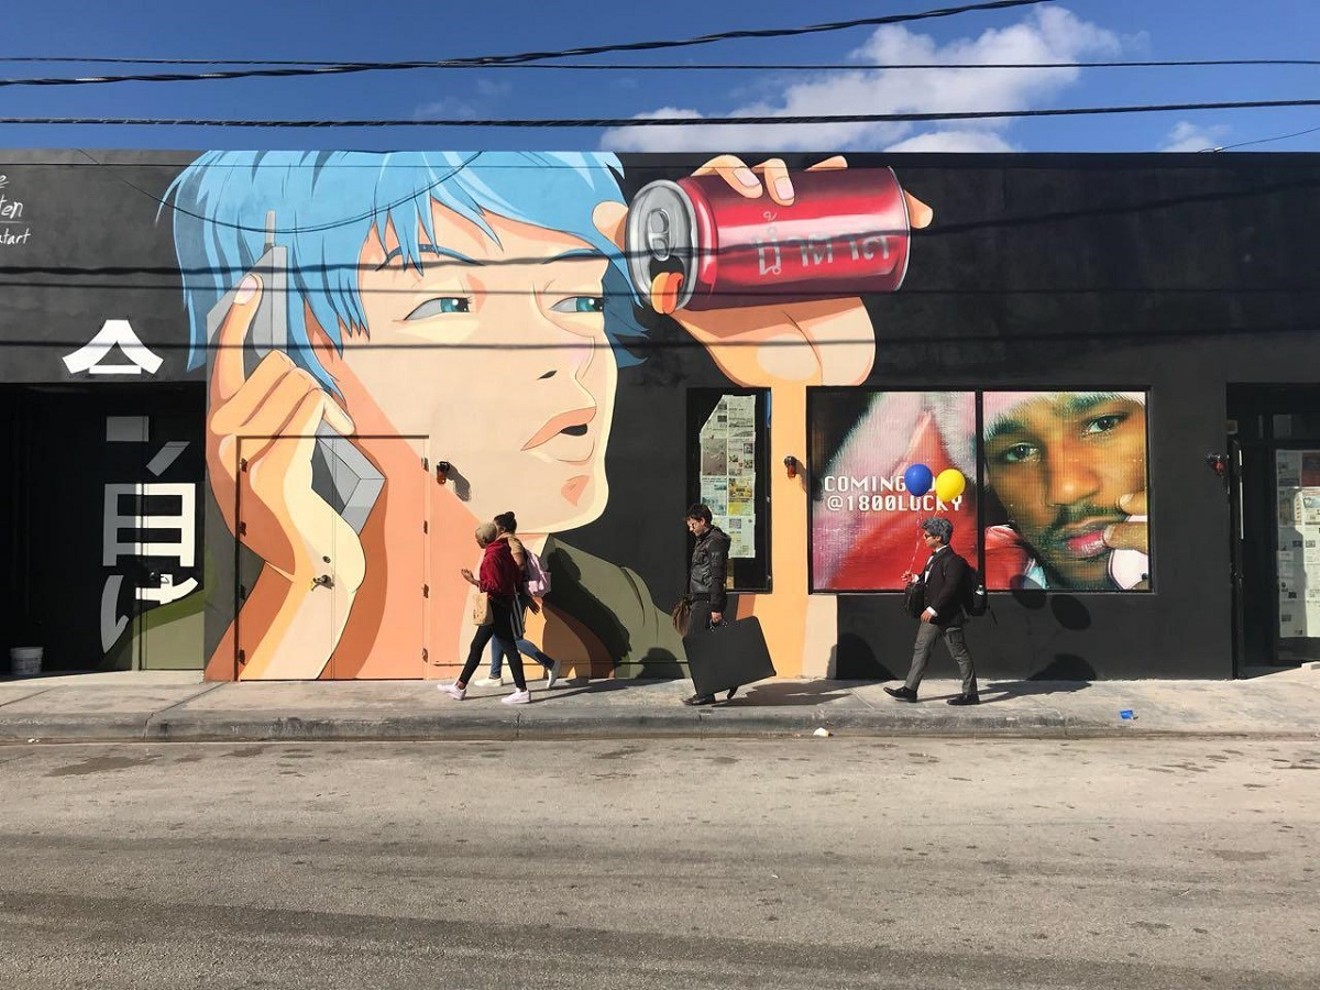 1-800-Lucky is set to open in Wynwood.